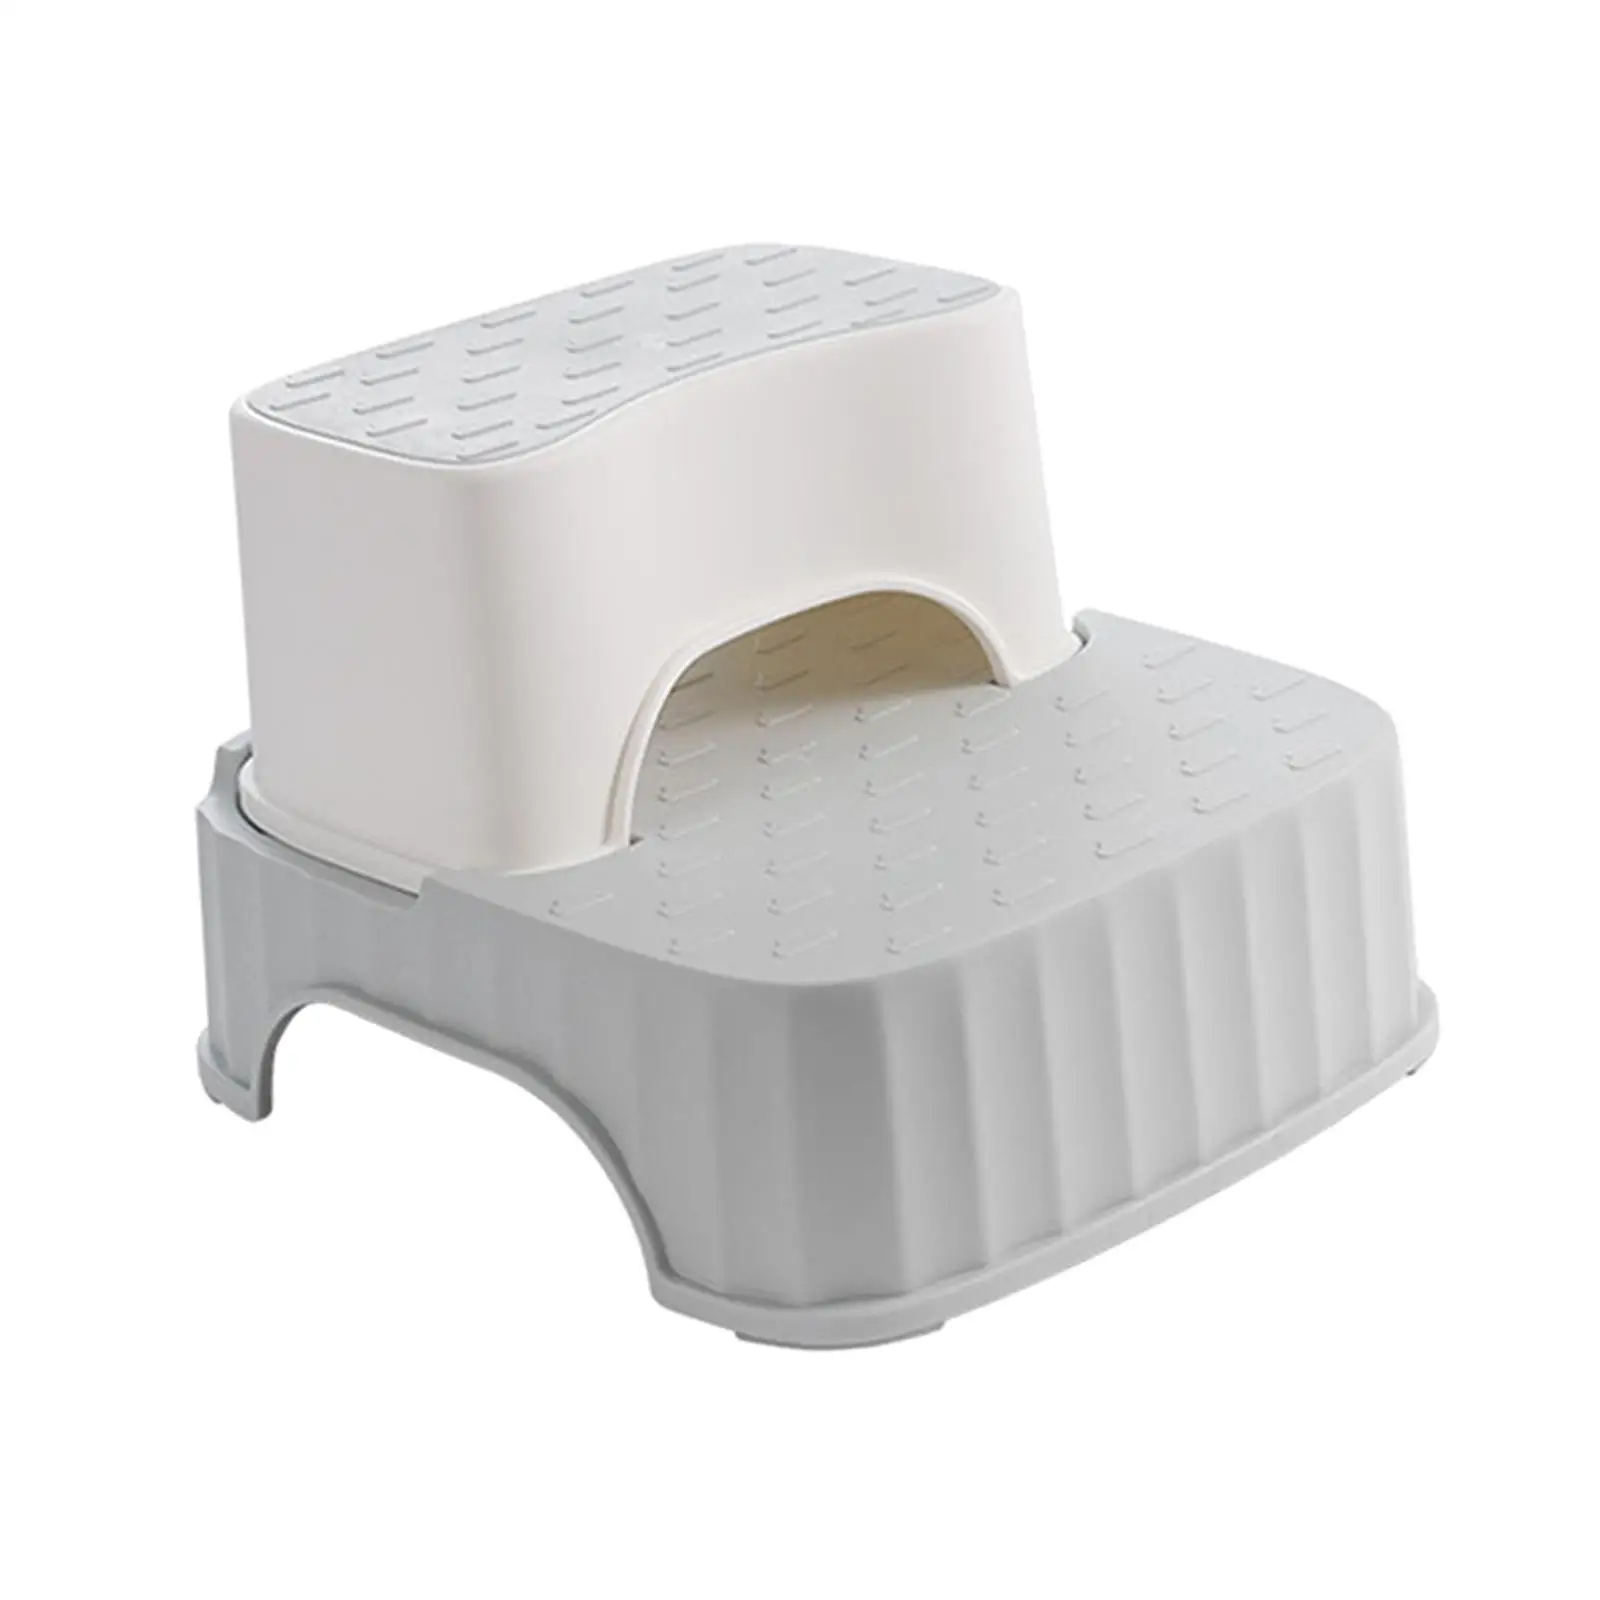 Portable Toilet Step Stool Bathroom Supplies Non Slip Foot Rest Cushion Foot Stool for Study Living Room Bedroom Holiday Gifts